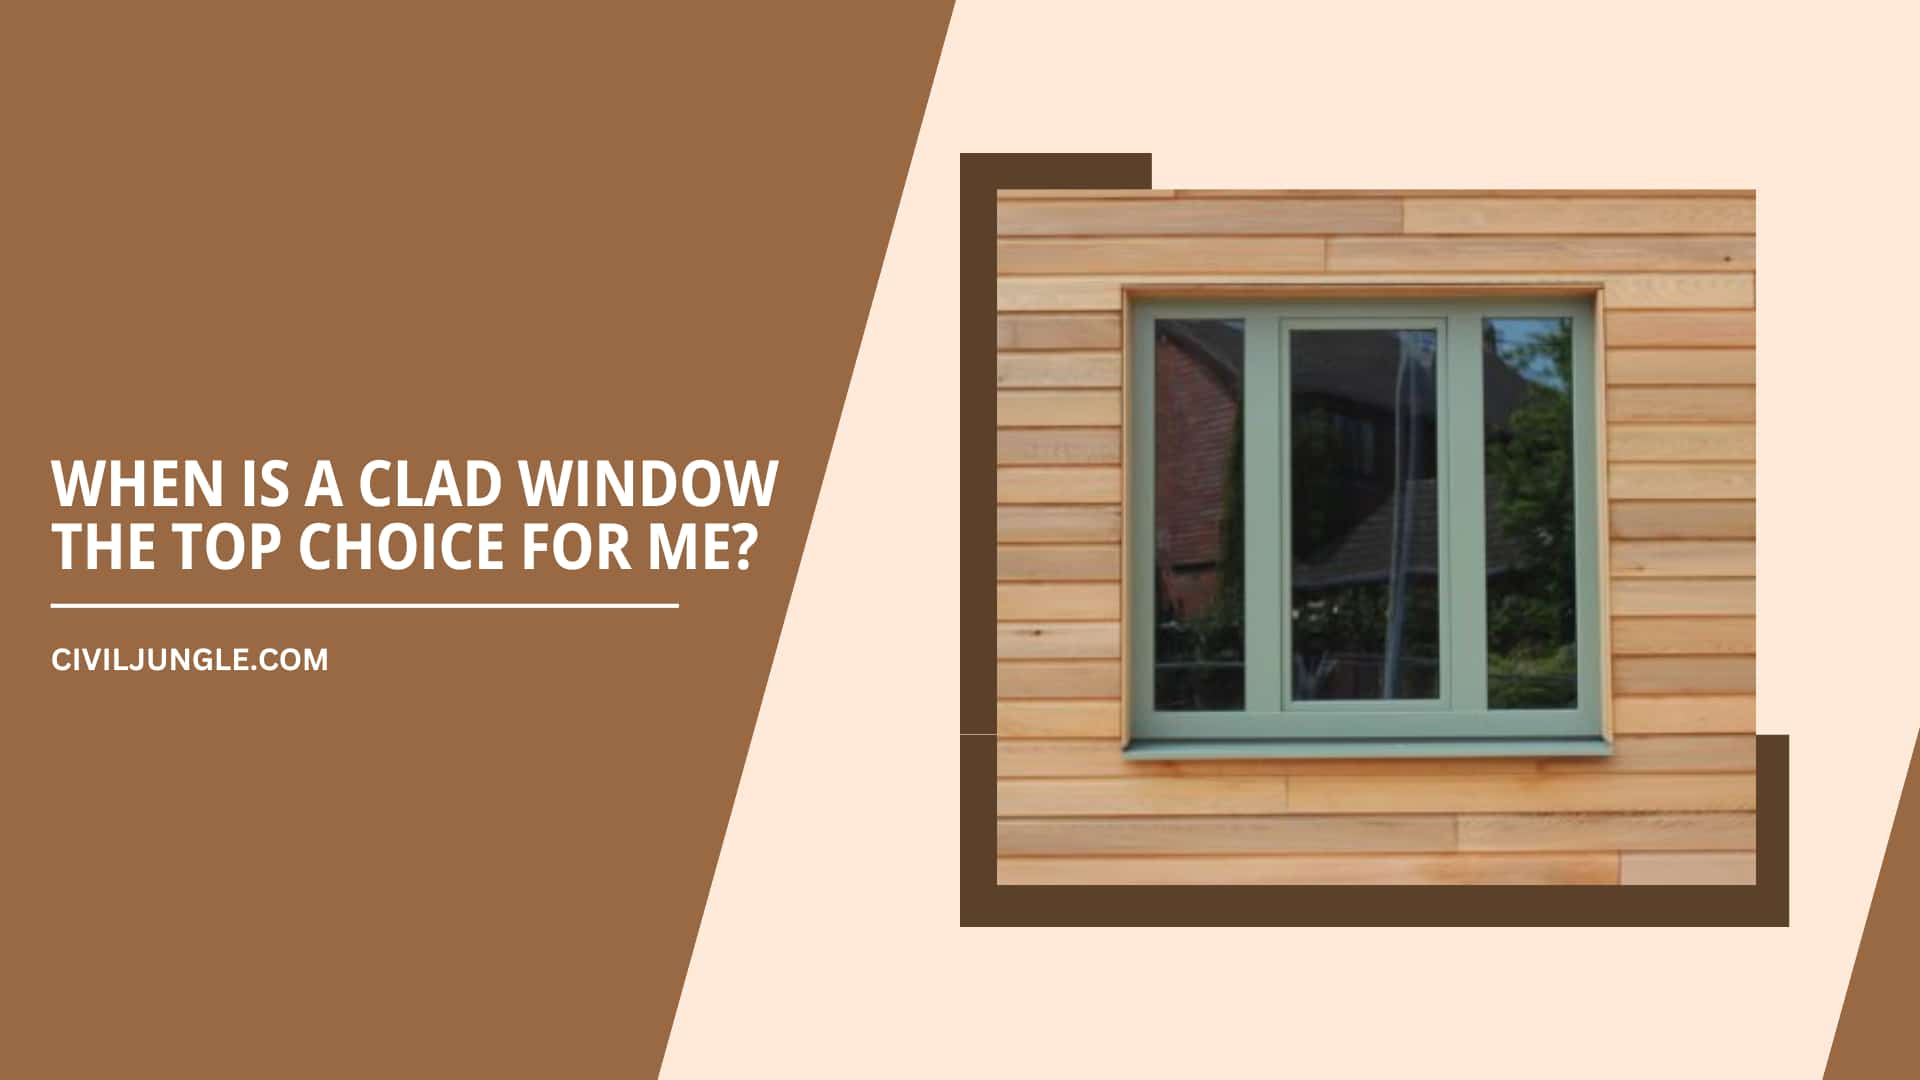 WHEN IS A CLAD WINDOW THE TOP CHOICE FOR ME?